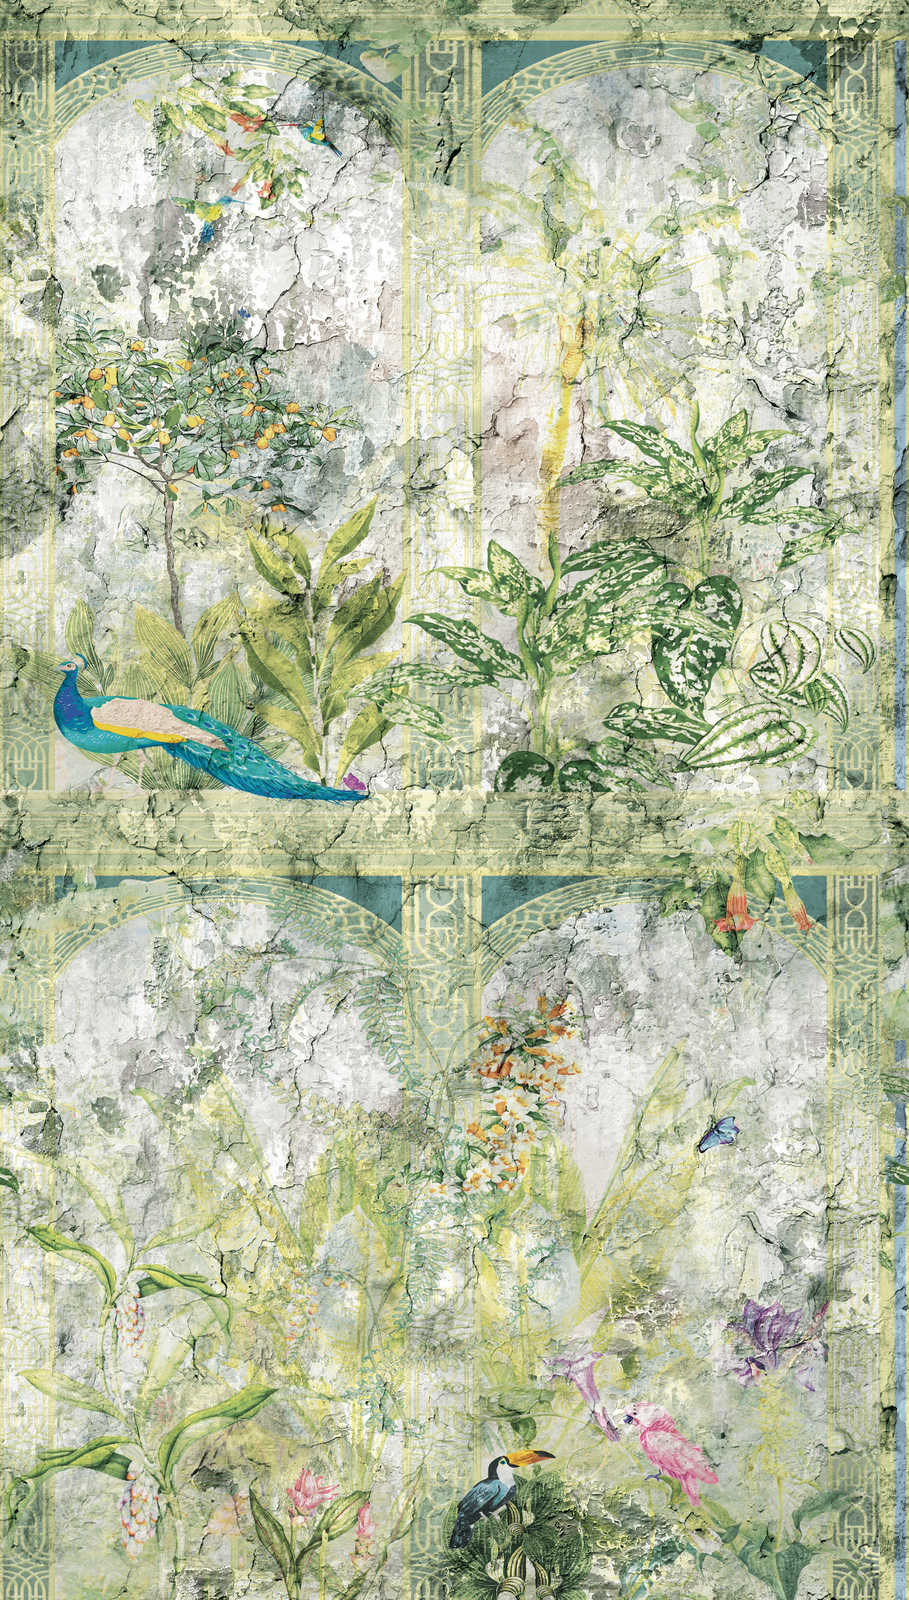             Wallpaper with jungle look and birds in vintage style - green, blue, grey
        